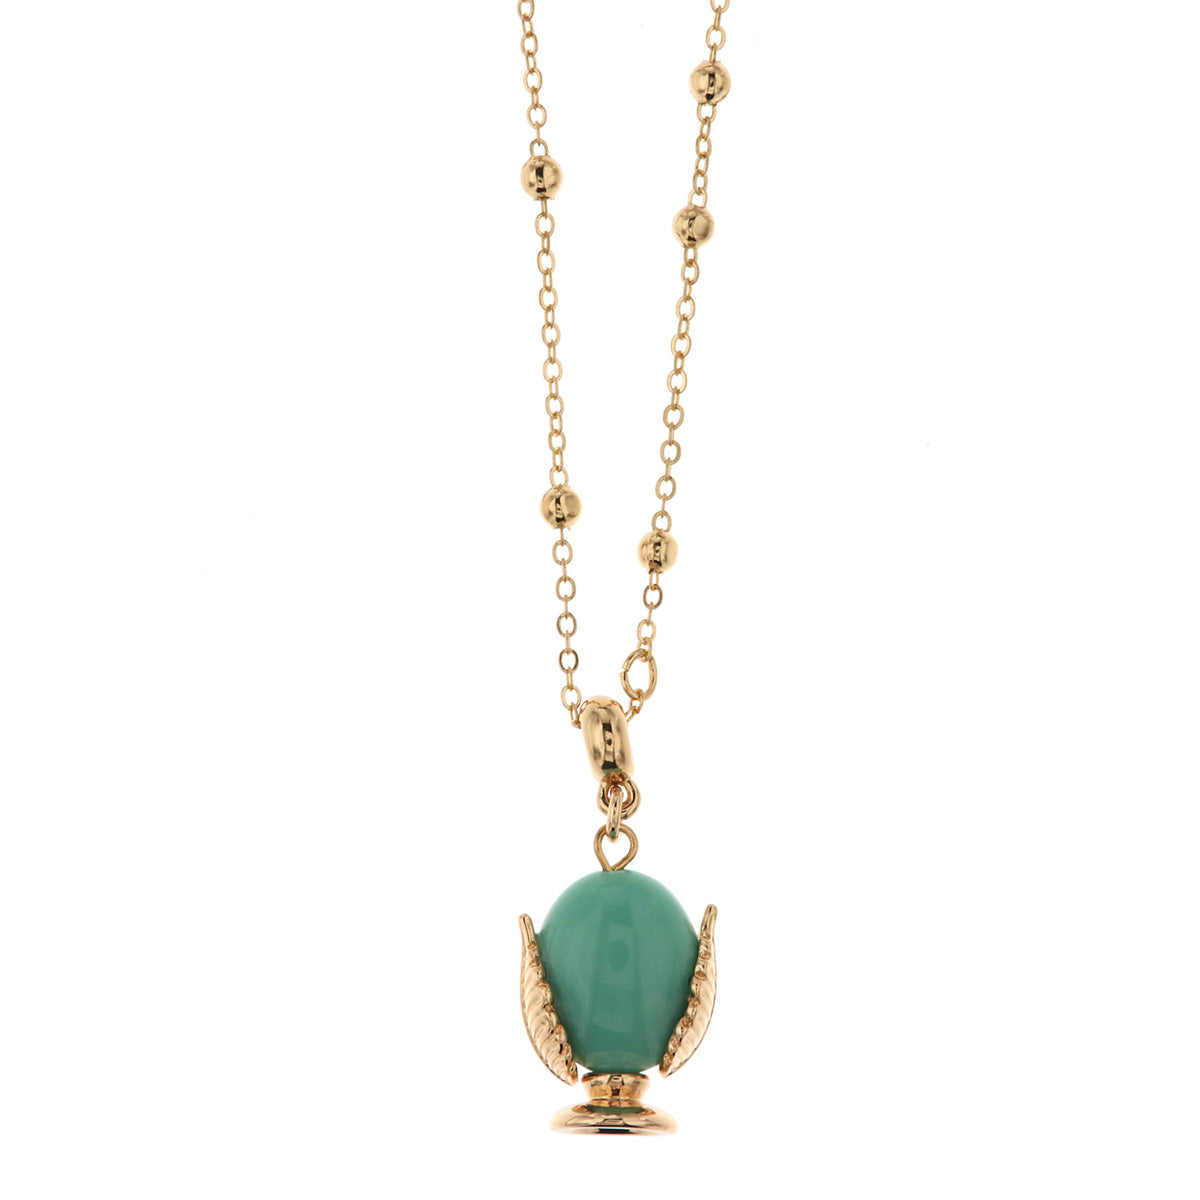 Metal necklace with water -colored enamel charming pumo